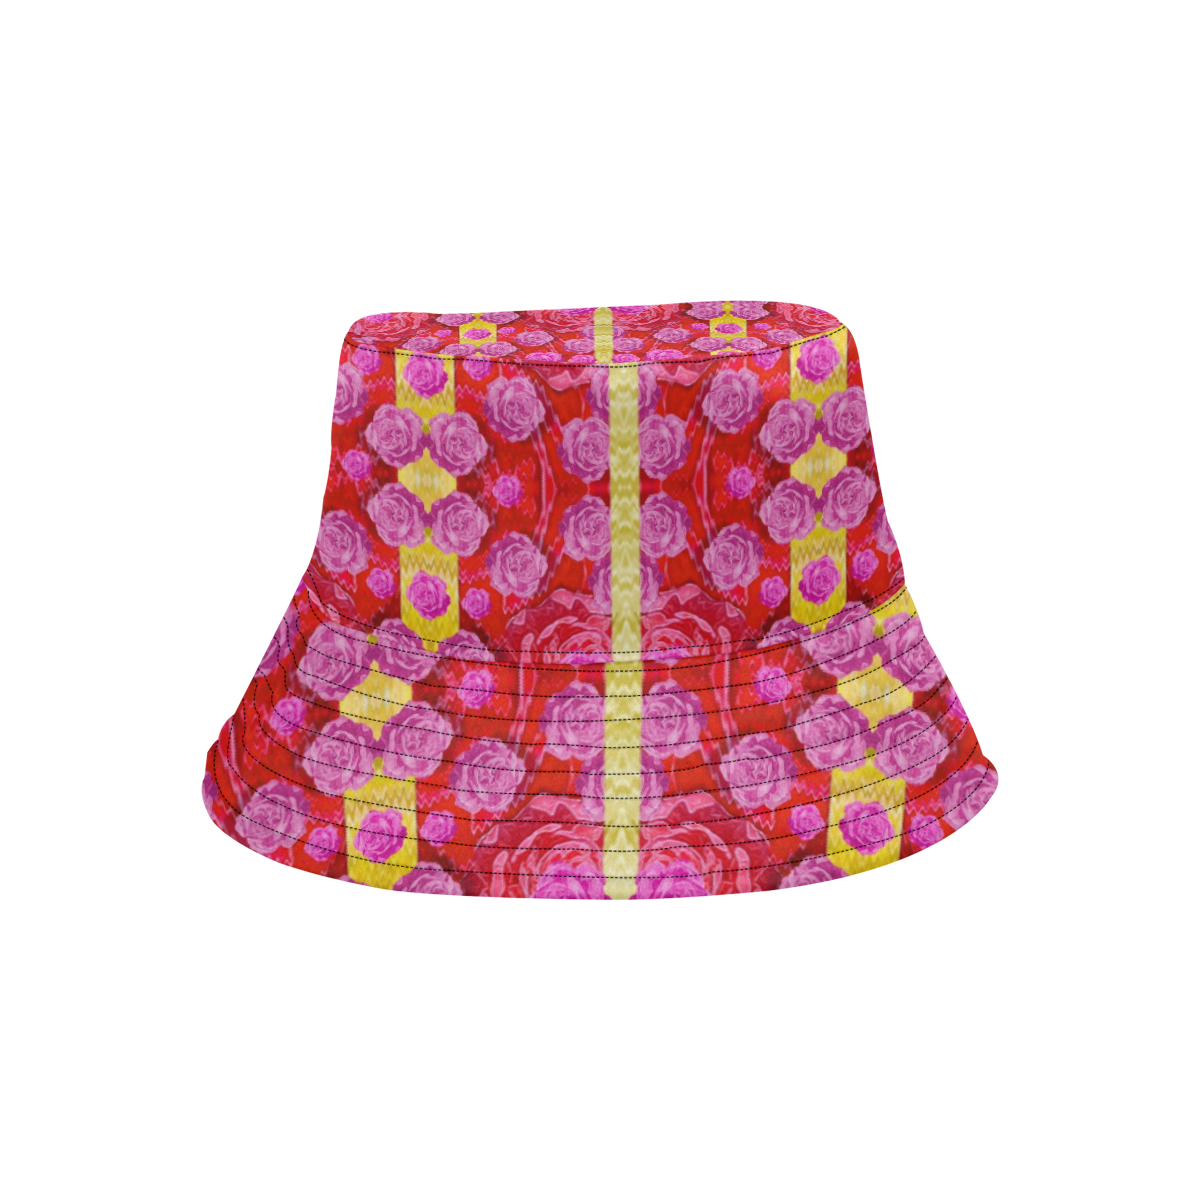 Roses and butterflies on ribbons as a gift of love All Over Print Bucket Hat